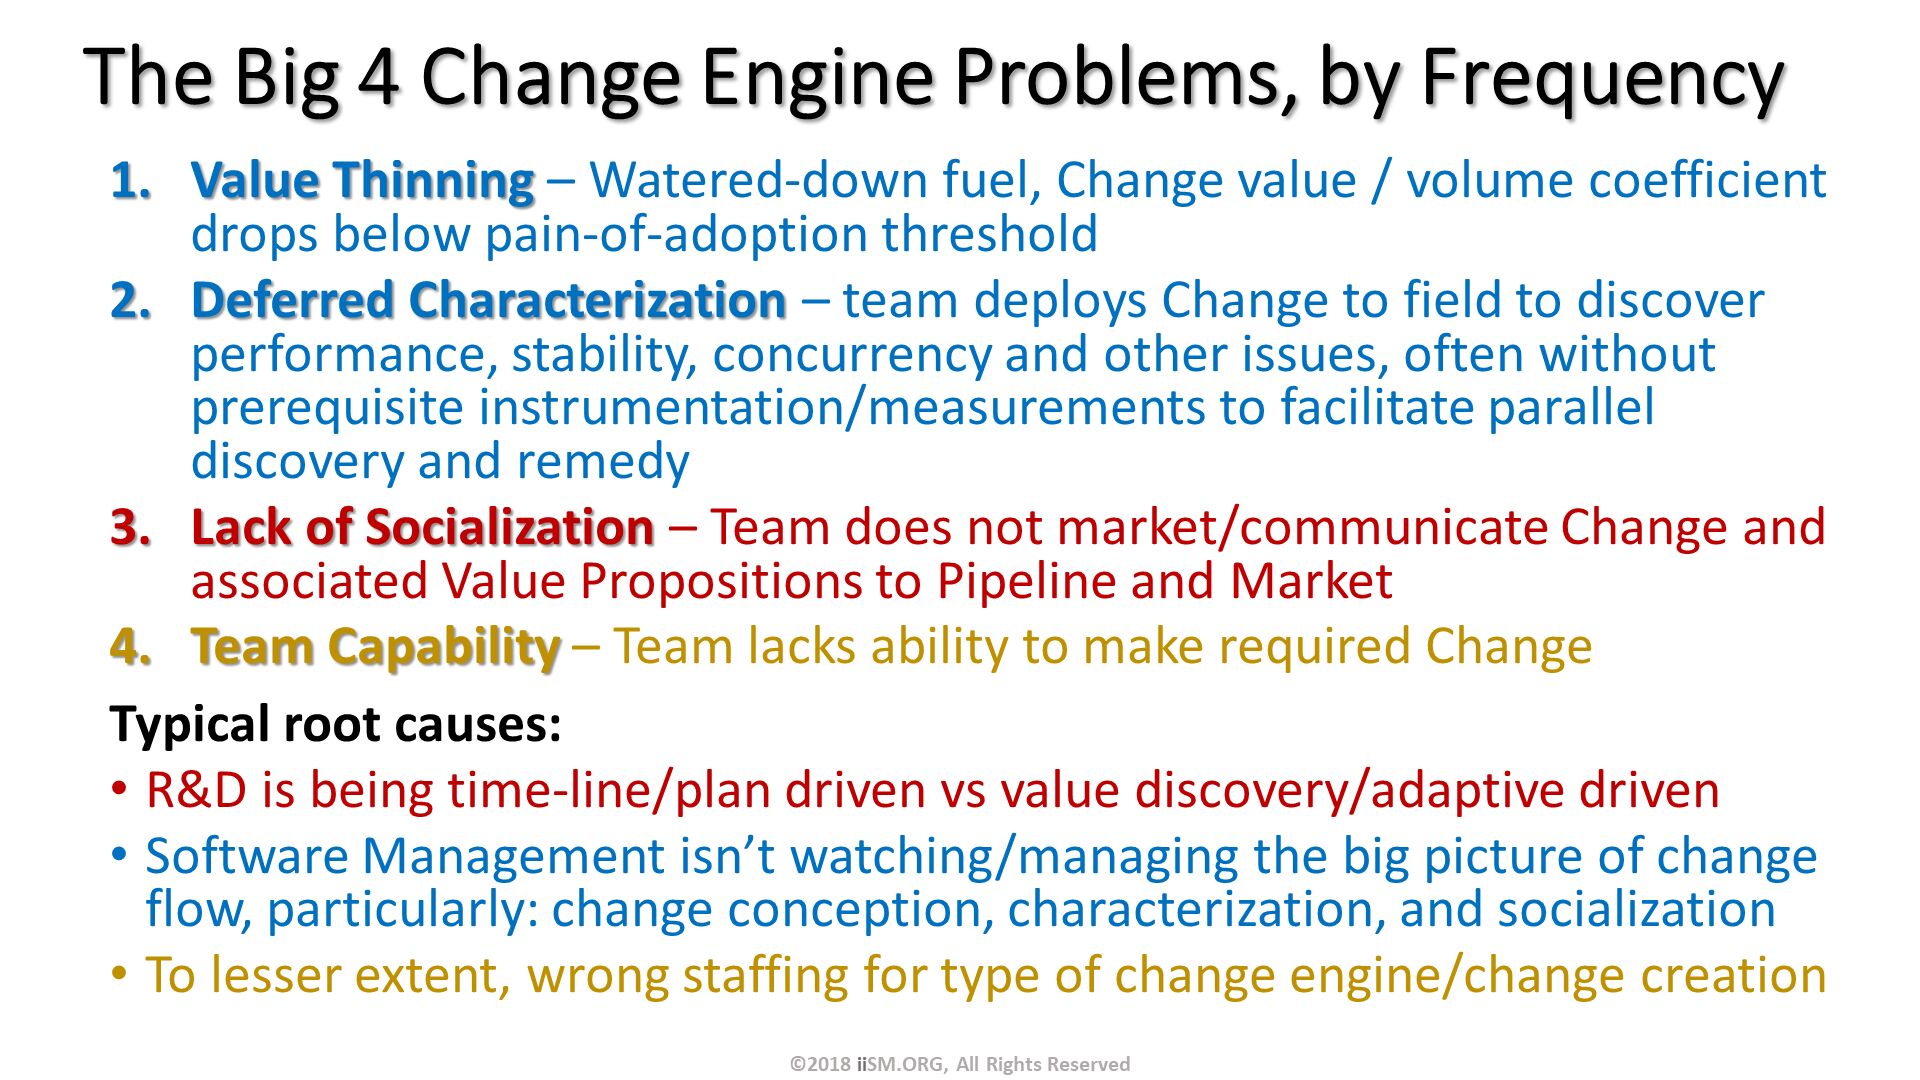 The Big 4 Change Engine Problems, by Frequency. Value Thinning – Watered-down fuel, Change value / volume coefficient drops below pain-of-adoption threshold
Deferred Characterization – team deploys Change to field to discover performance, stability, concurrency and other issues, often without prerequisite instrumentation/measurements to facilitate parallel discovery and remedy
Lack of Socialization – Team does not market/communicate Change and associated Value Propositions to Pipeline and Market
Team Capability – Team lacks ability to make required Change 
Typical root causes: 
R&D is being time-line/plan driven vs value discovery/adaptive driven
Software Management isn’t watching/managing the big picture of change flow, particularly: change conception, characterization, and socialization
To lesser extent, wrong staffing for type of change engine/change creation. ©2018 iiSM.ORG, All Rights Reserved. 